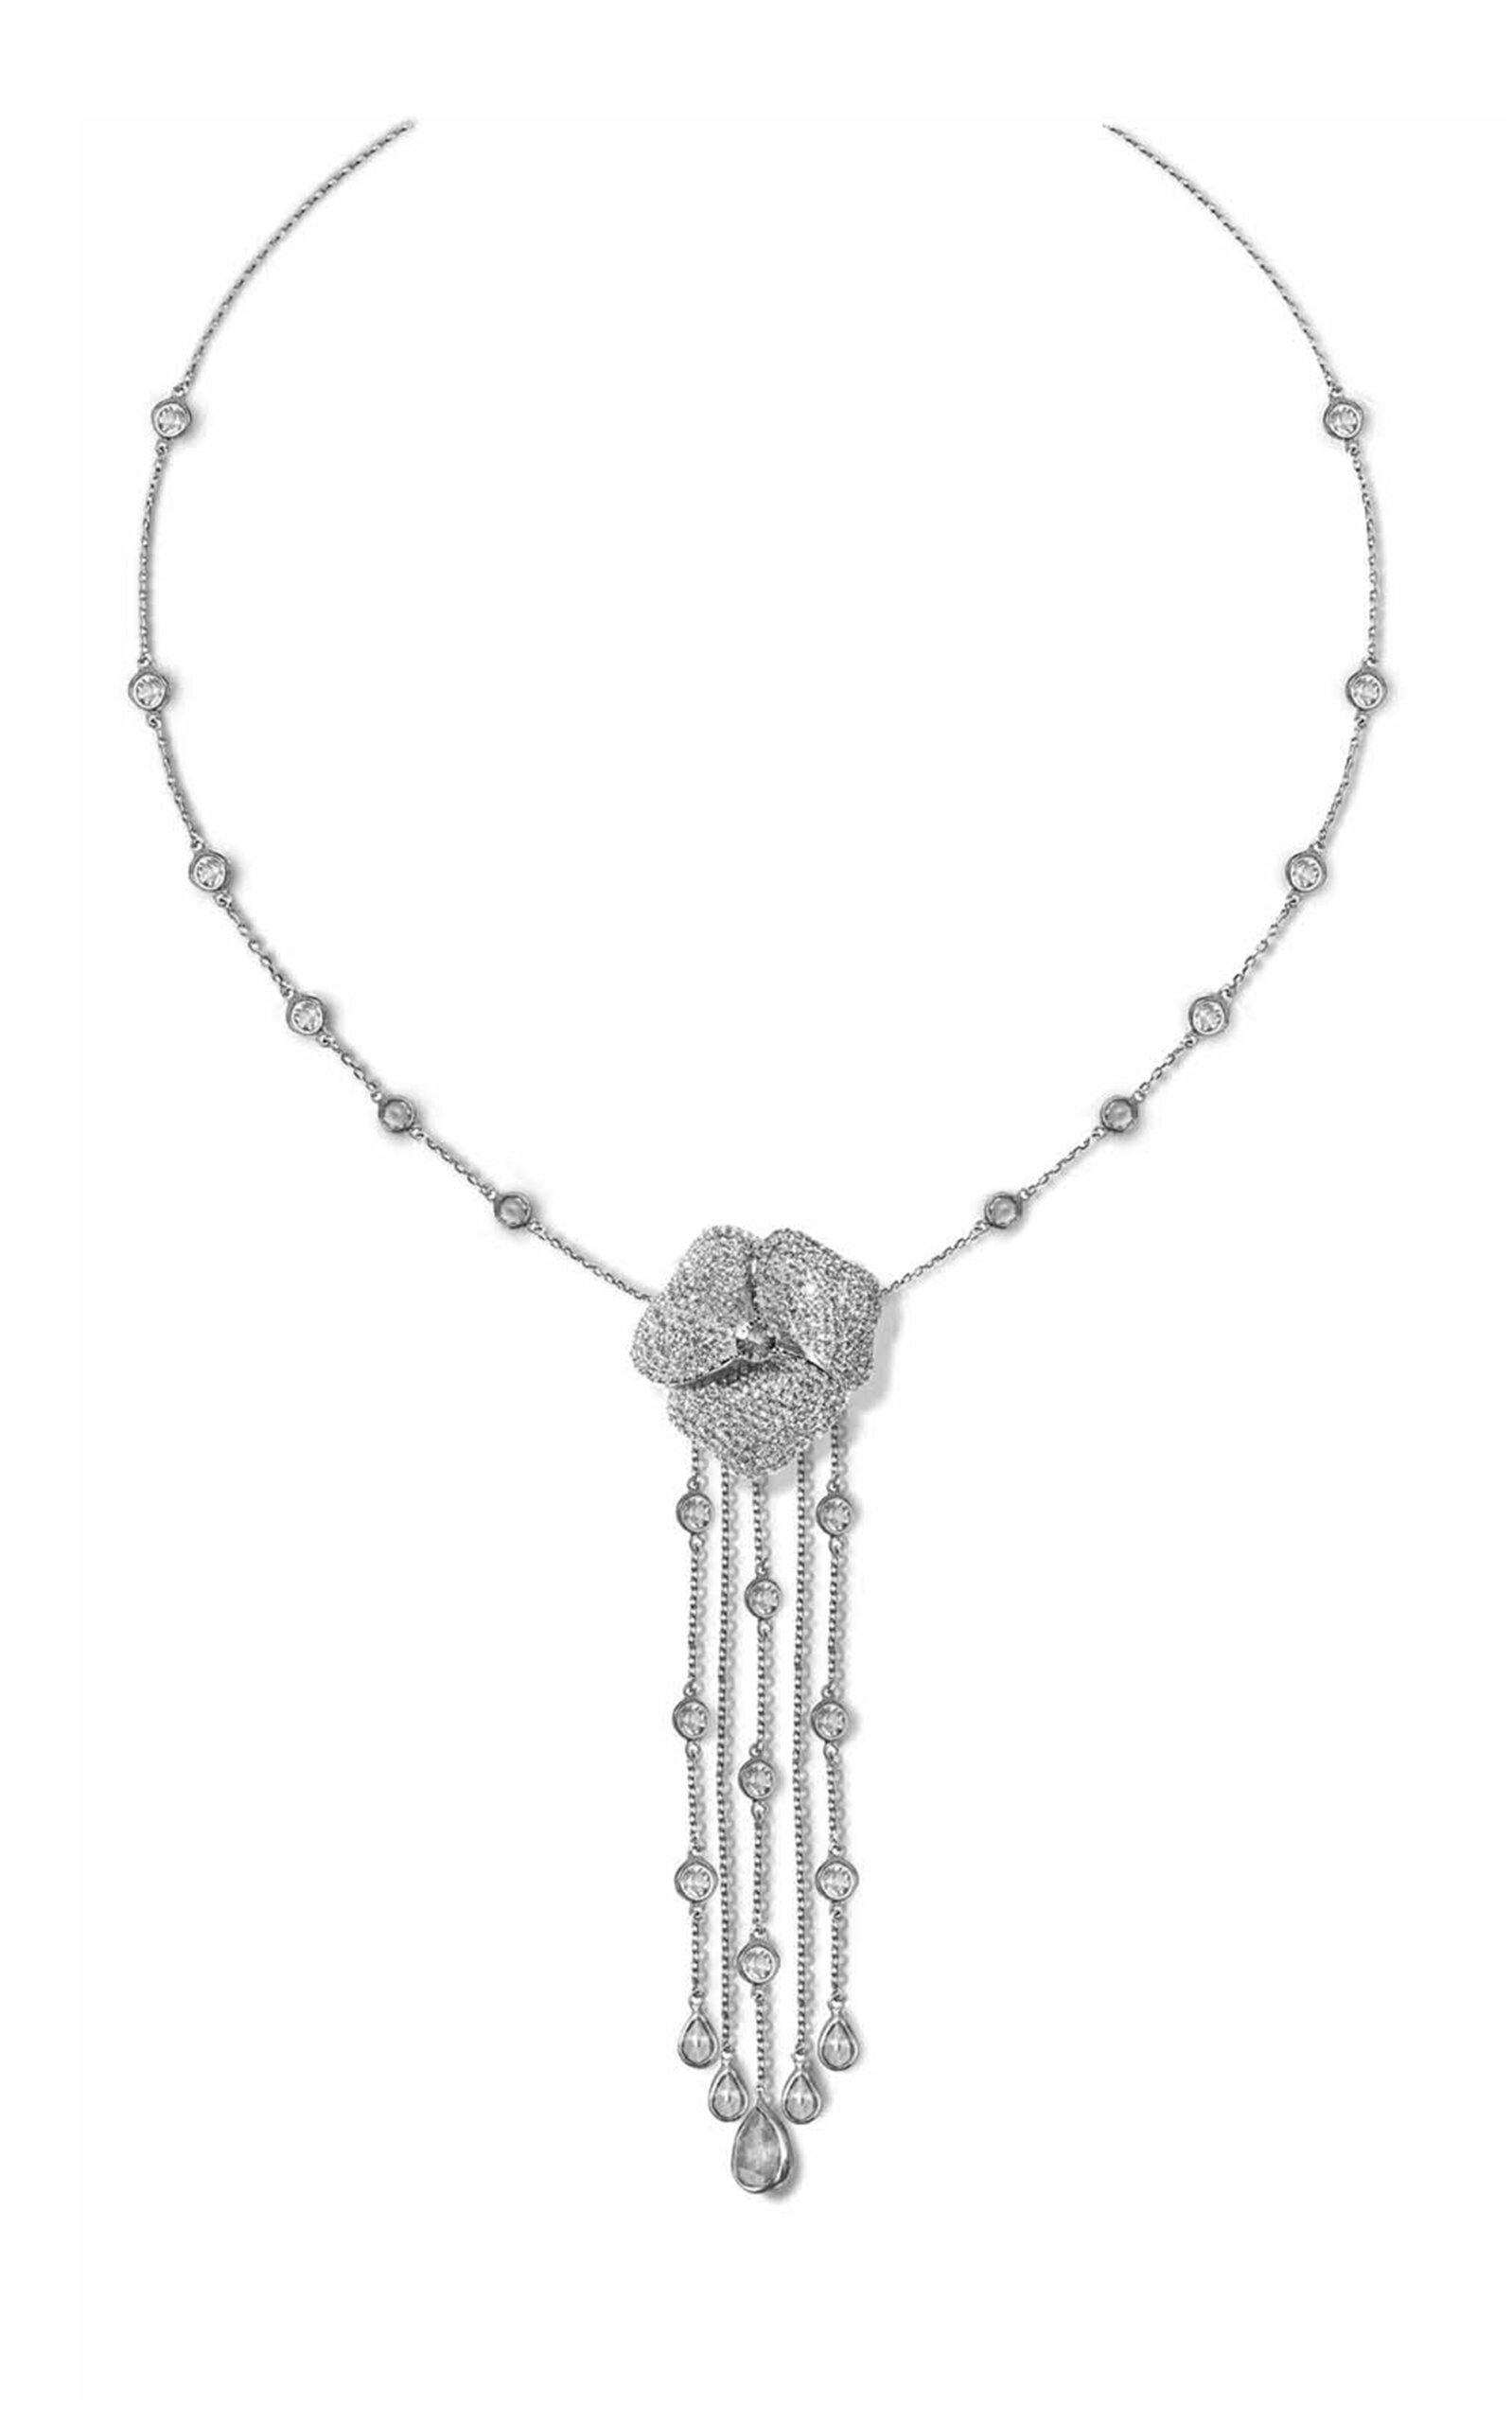 One of a Kind Bloom 18K White Gold Diamond Necklace